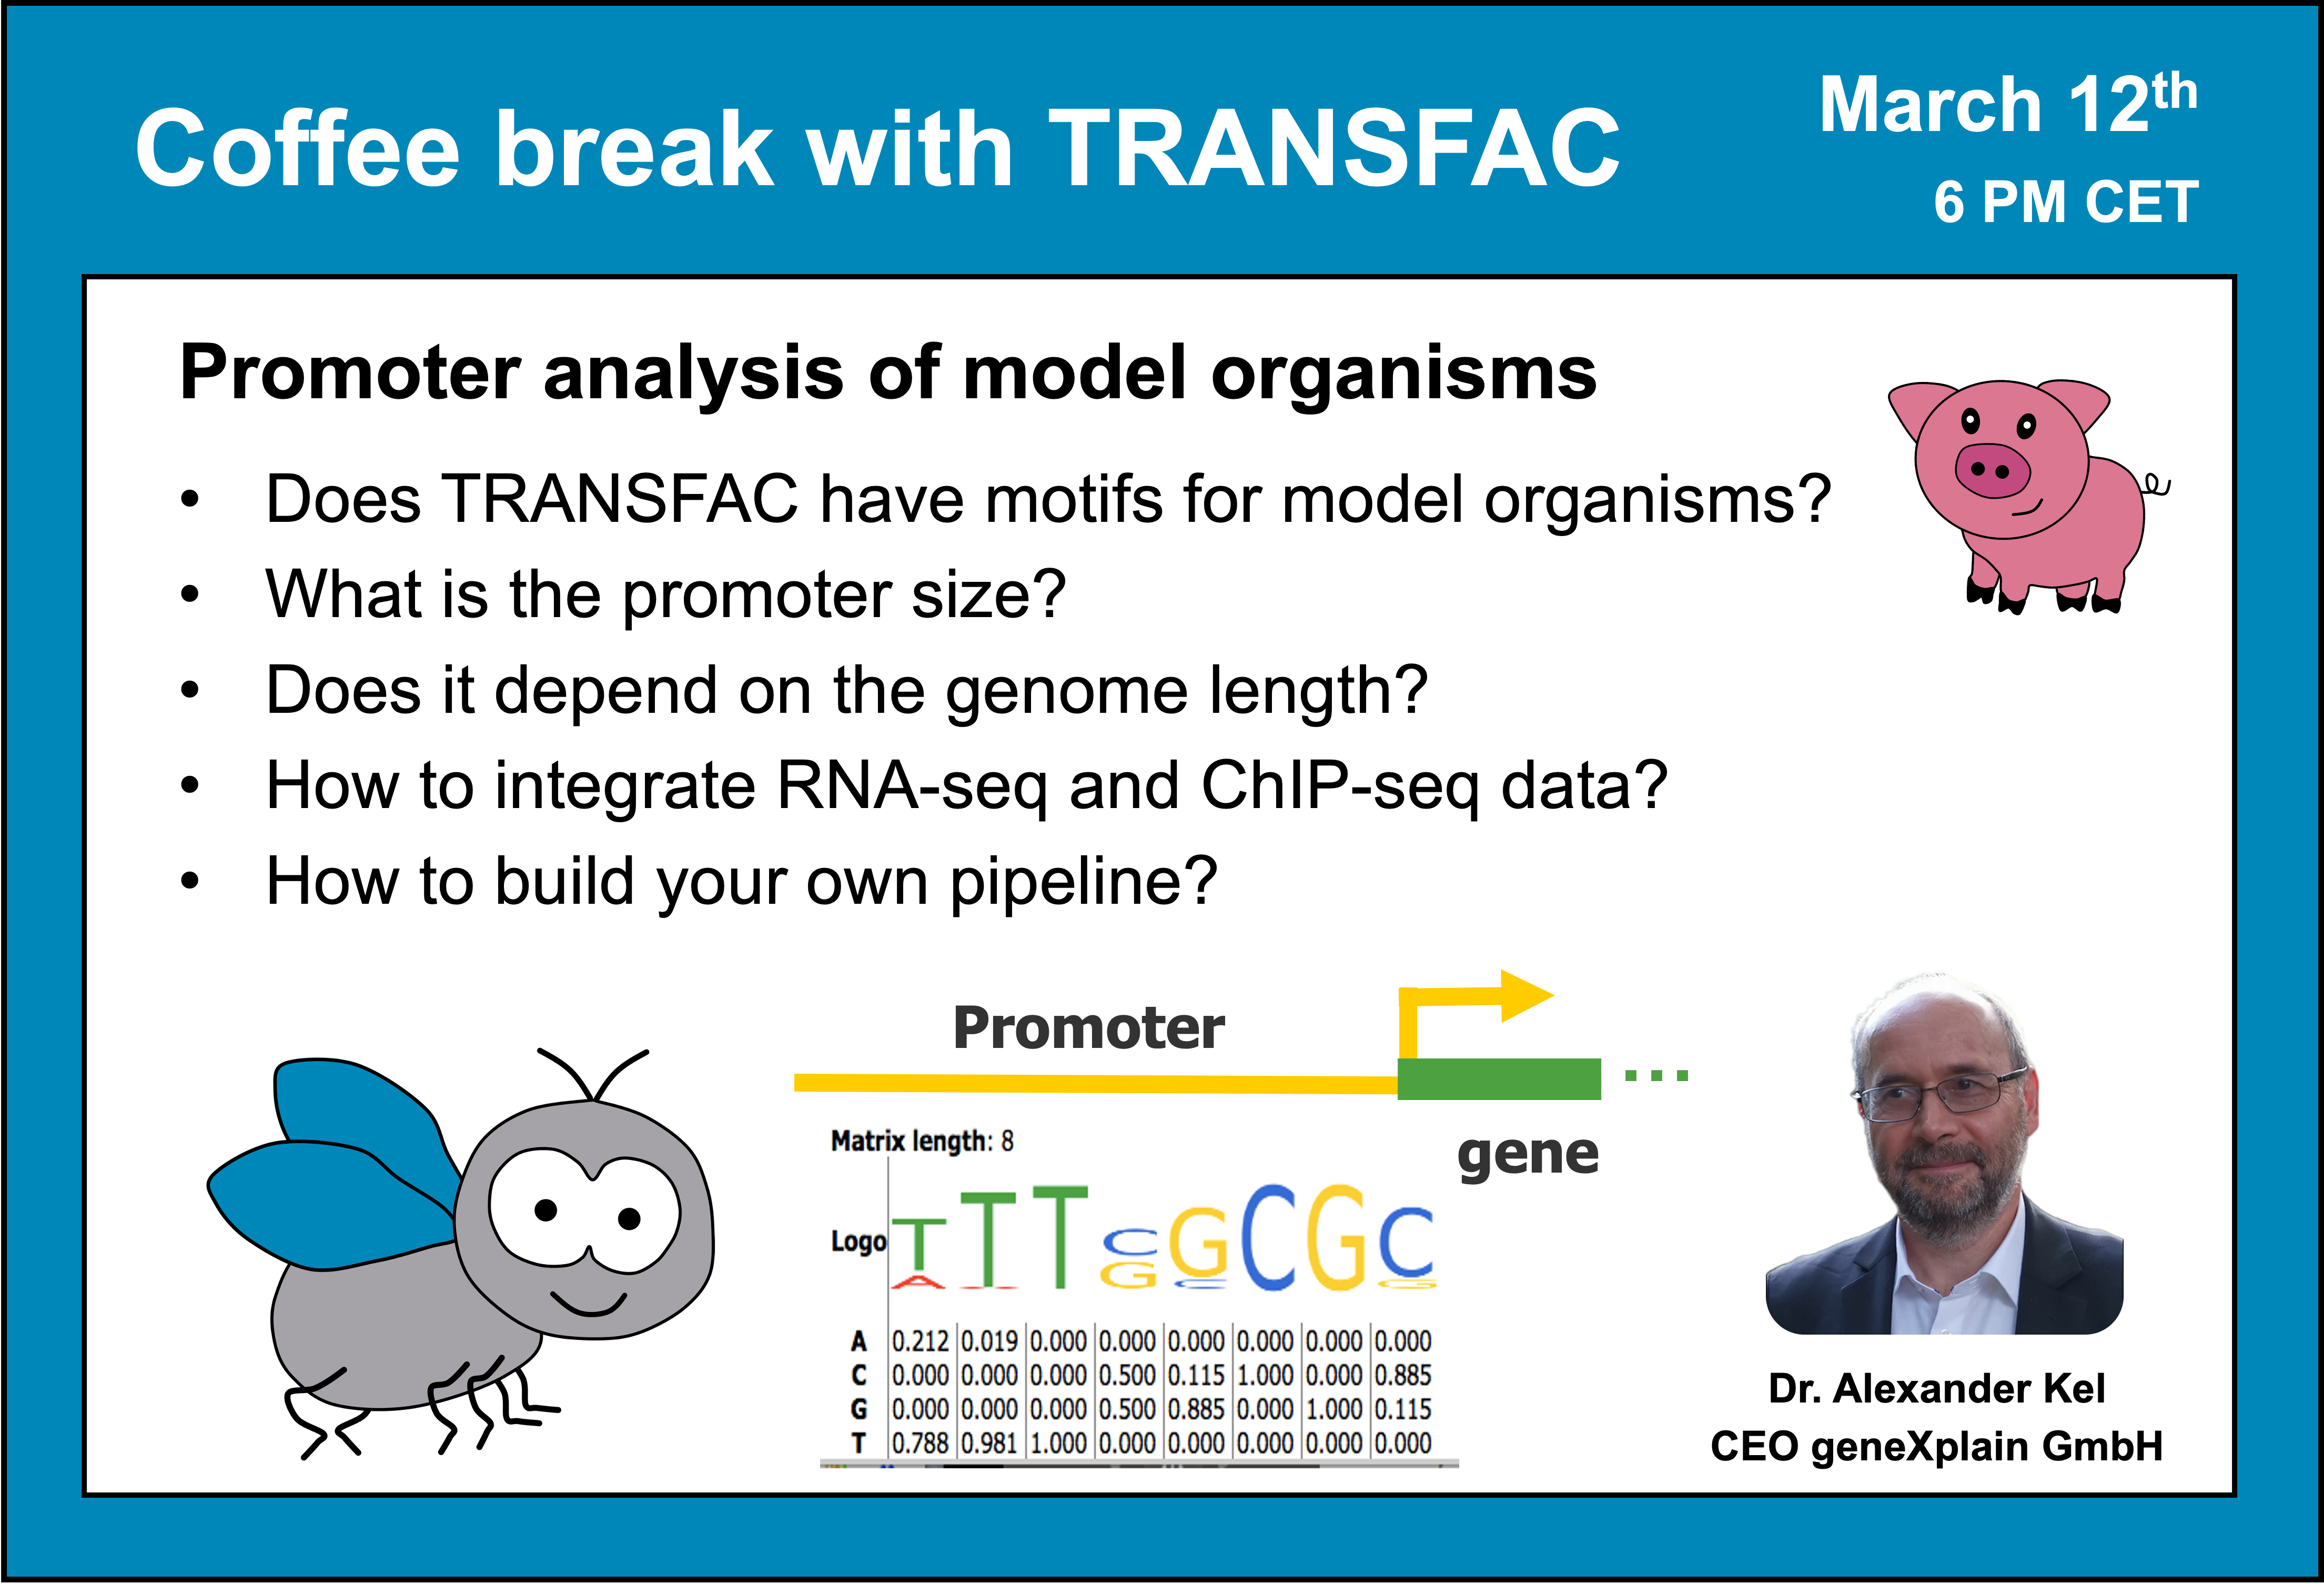 Coffee break with TRANSFAC- promoter analysis of model organisms (part 2)